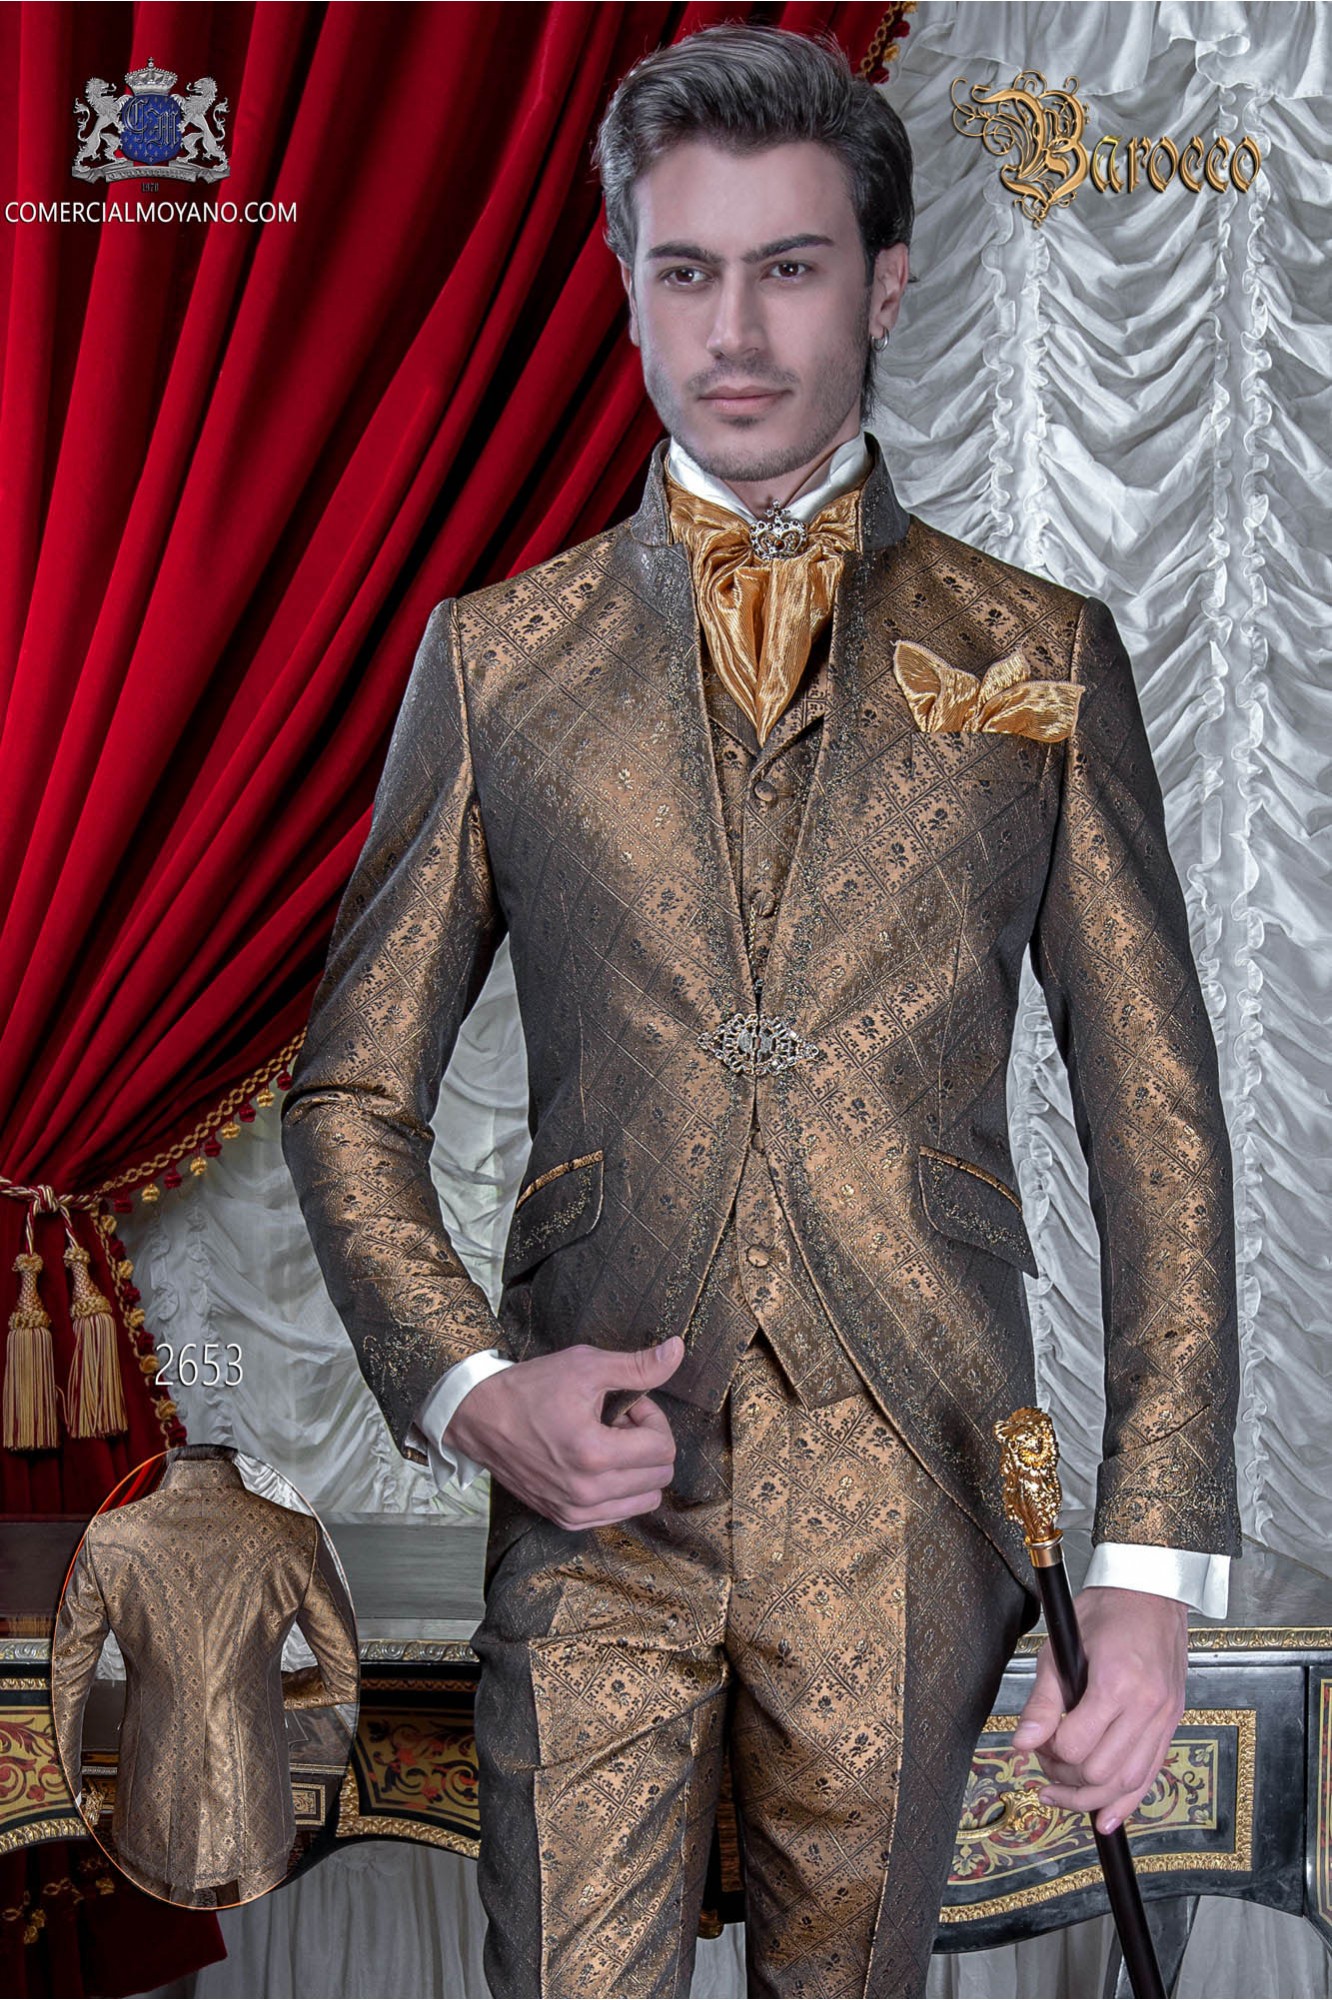 Baroque groom suit, vintage mao collar frock coat in gold jacquard fabric with golden embroidery and crystal clasp model 2653 Mario Moyano